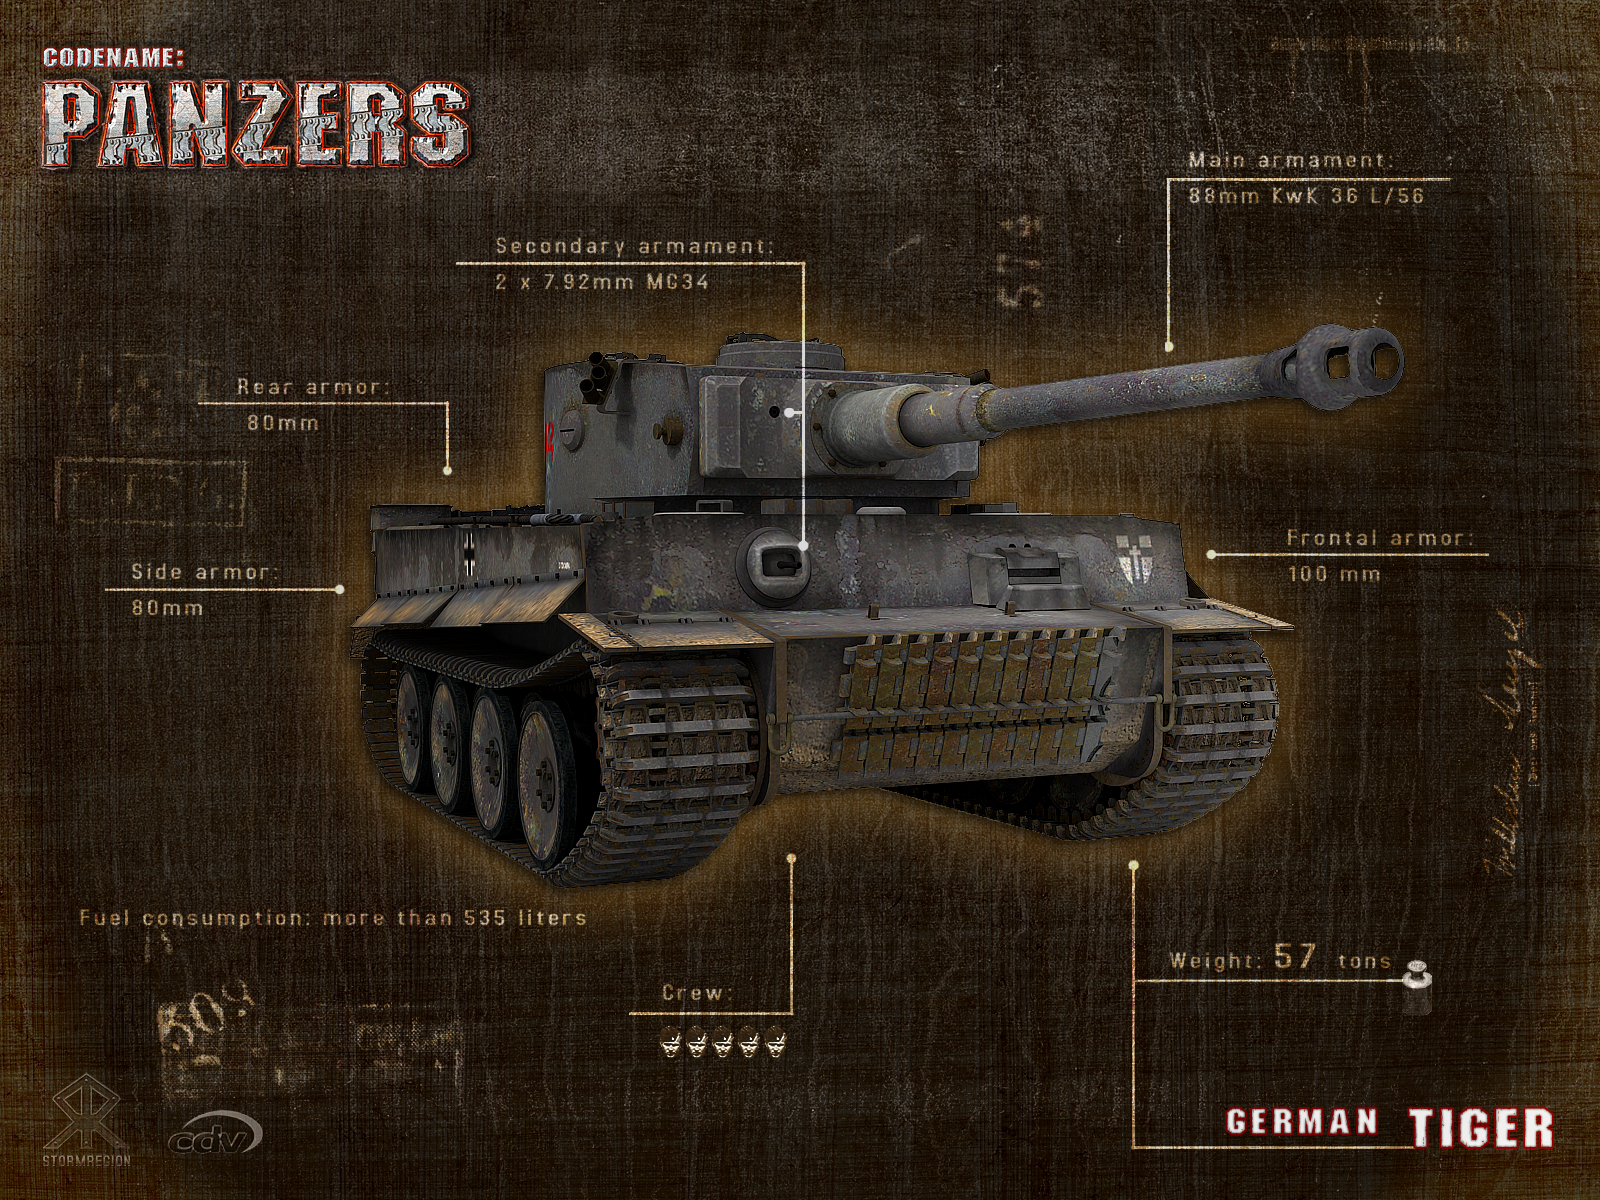 Codename Panzers wallpaper: Tiger image - Tank Lovers Group - Mod DB